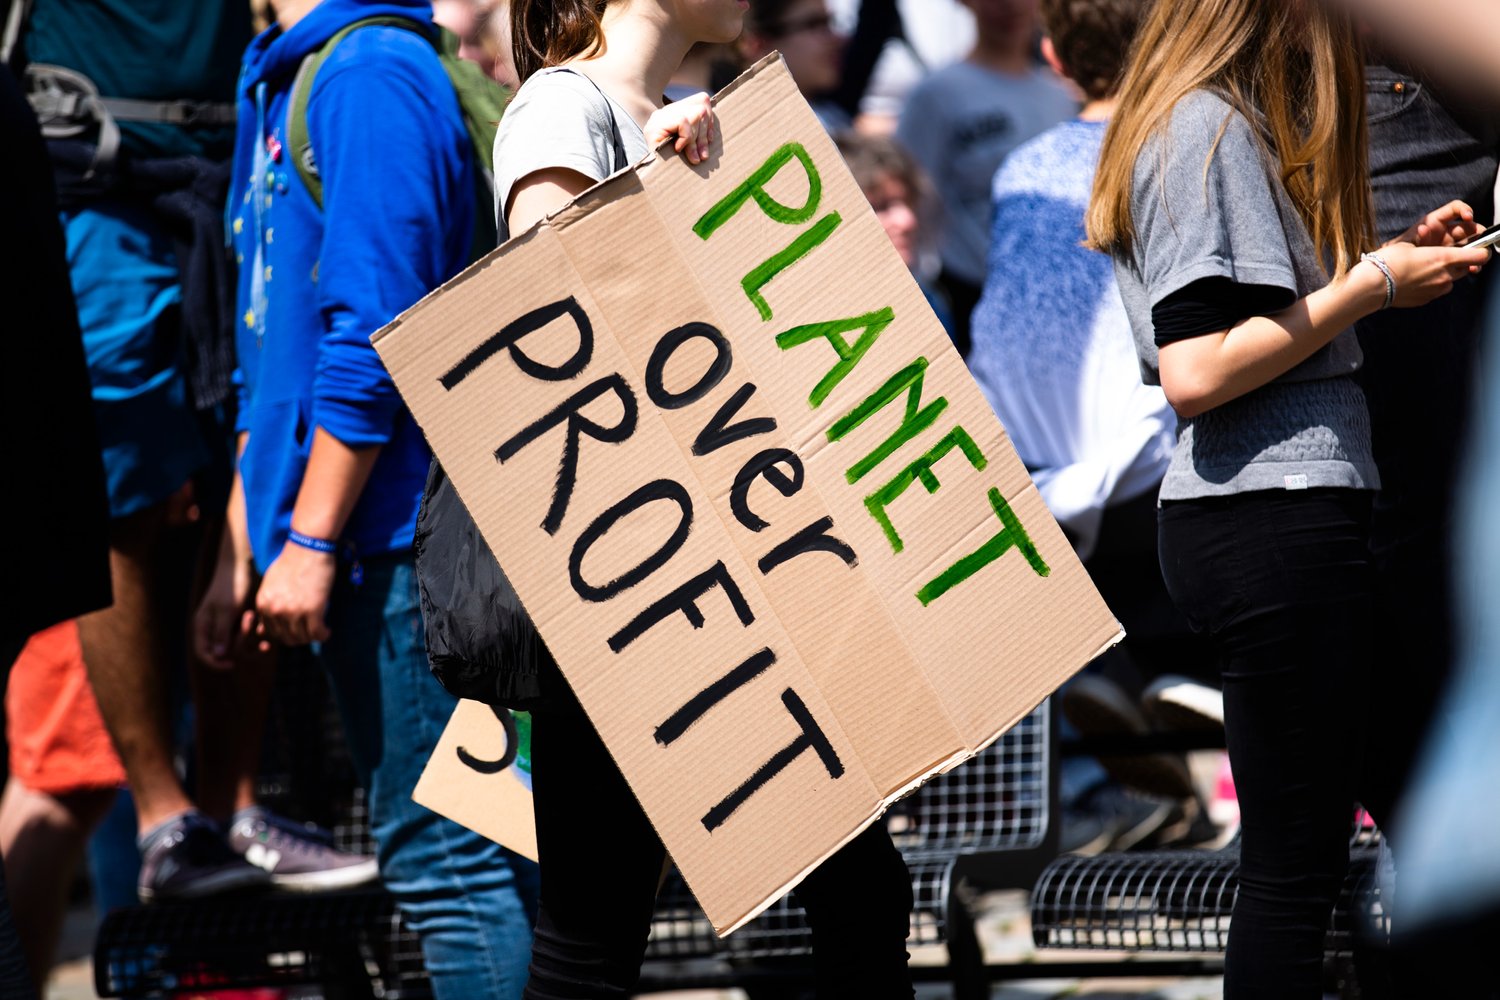 young person at protest holding a sign saying 'planet over profit'